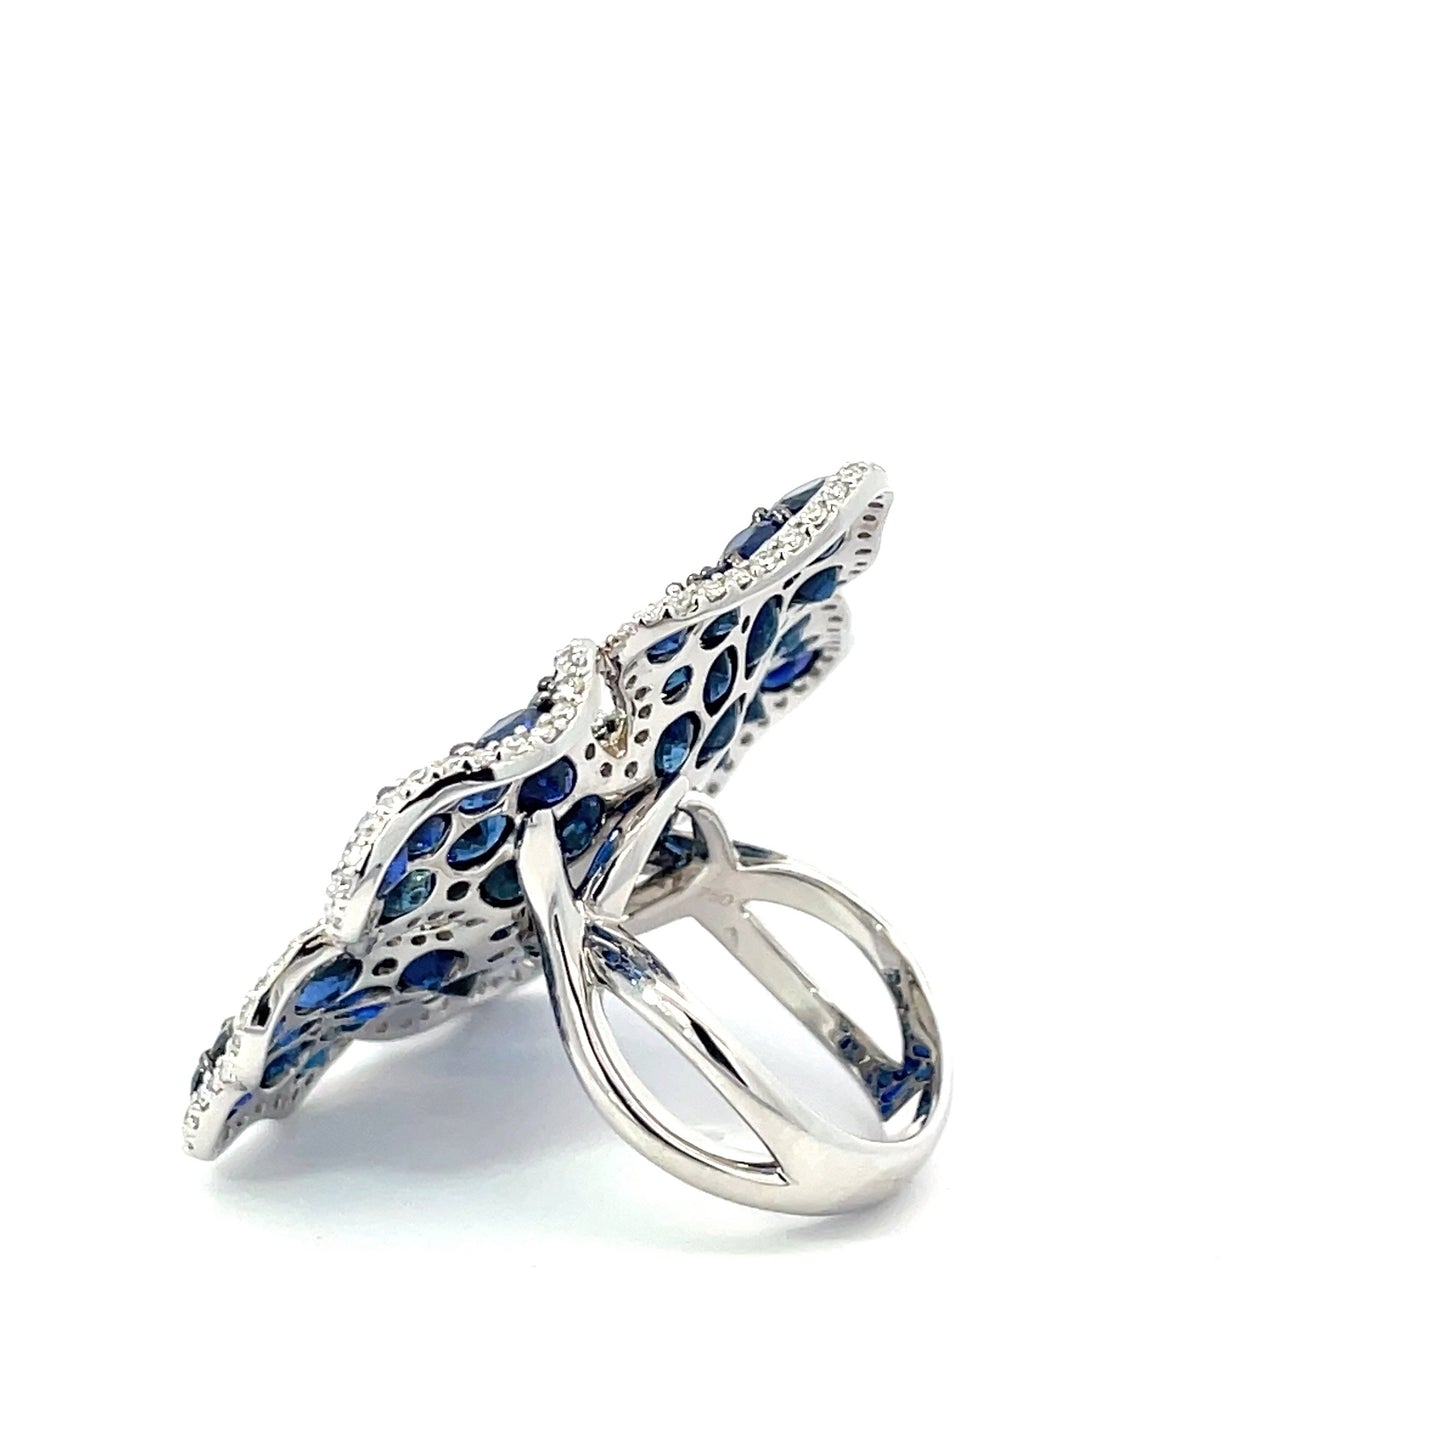 White Gold Blue Sapphire Ring from Flower Collection